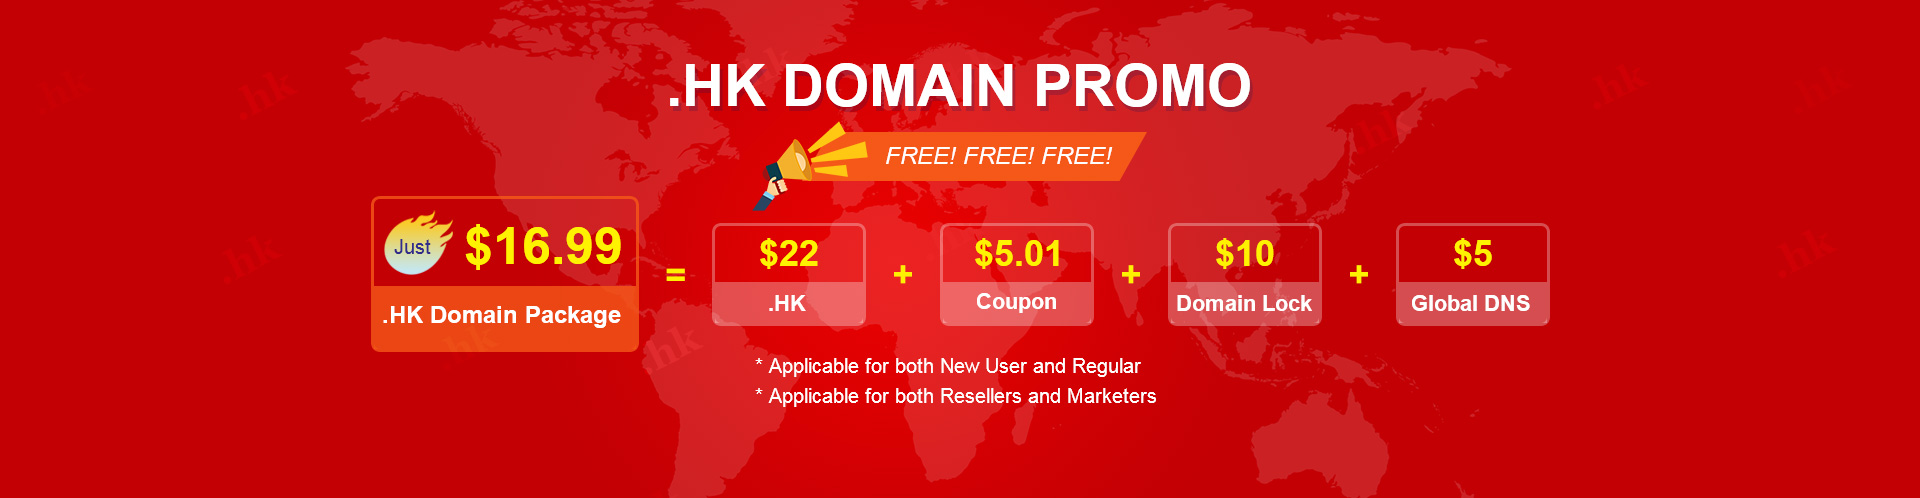 What is the difference between .hk domain name and com.hk domain name? Where can I register cheaply?